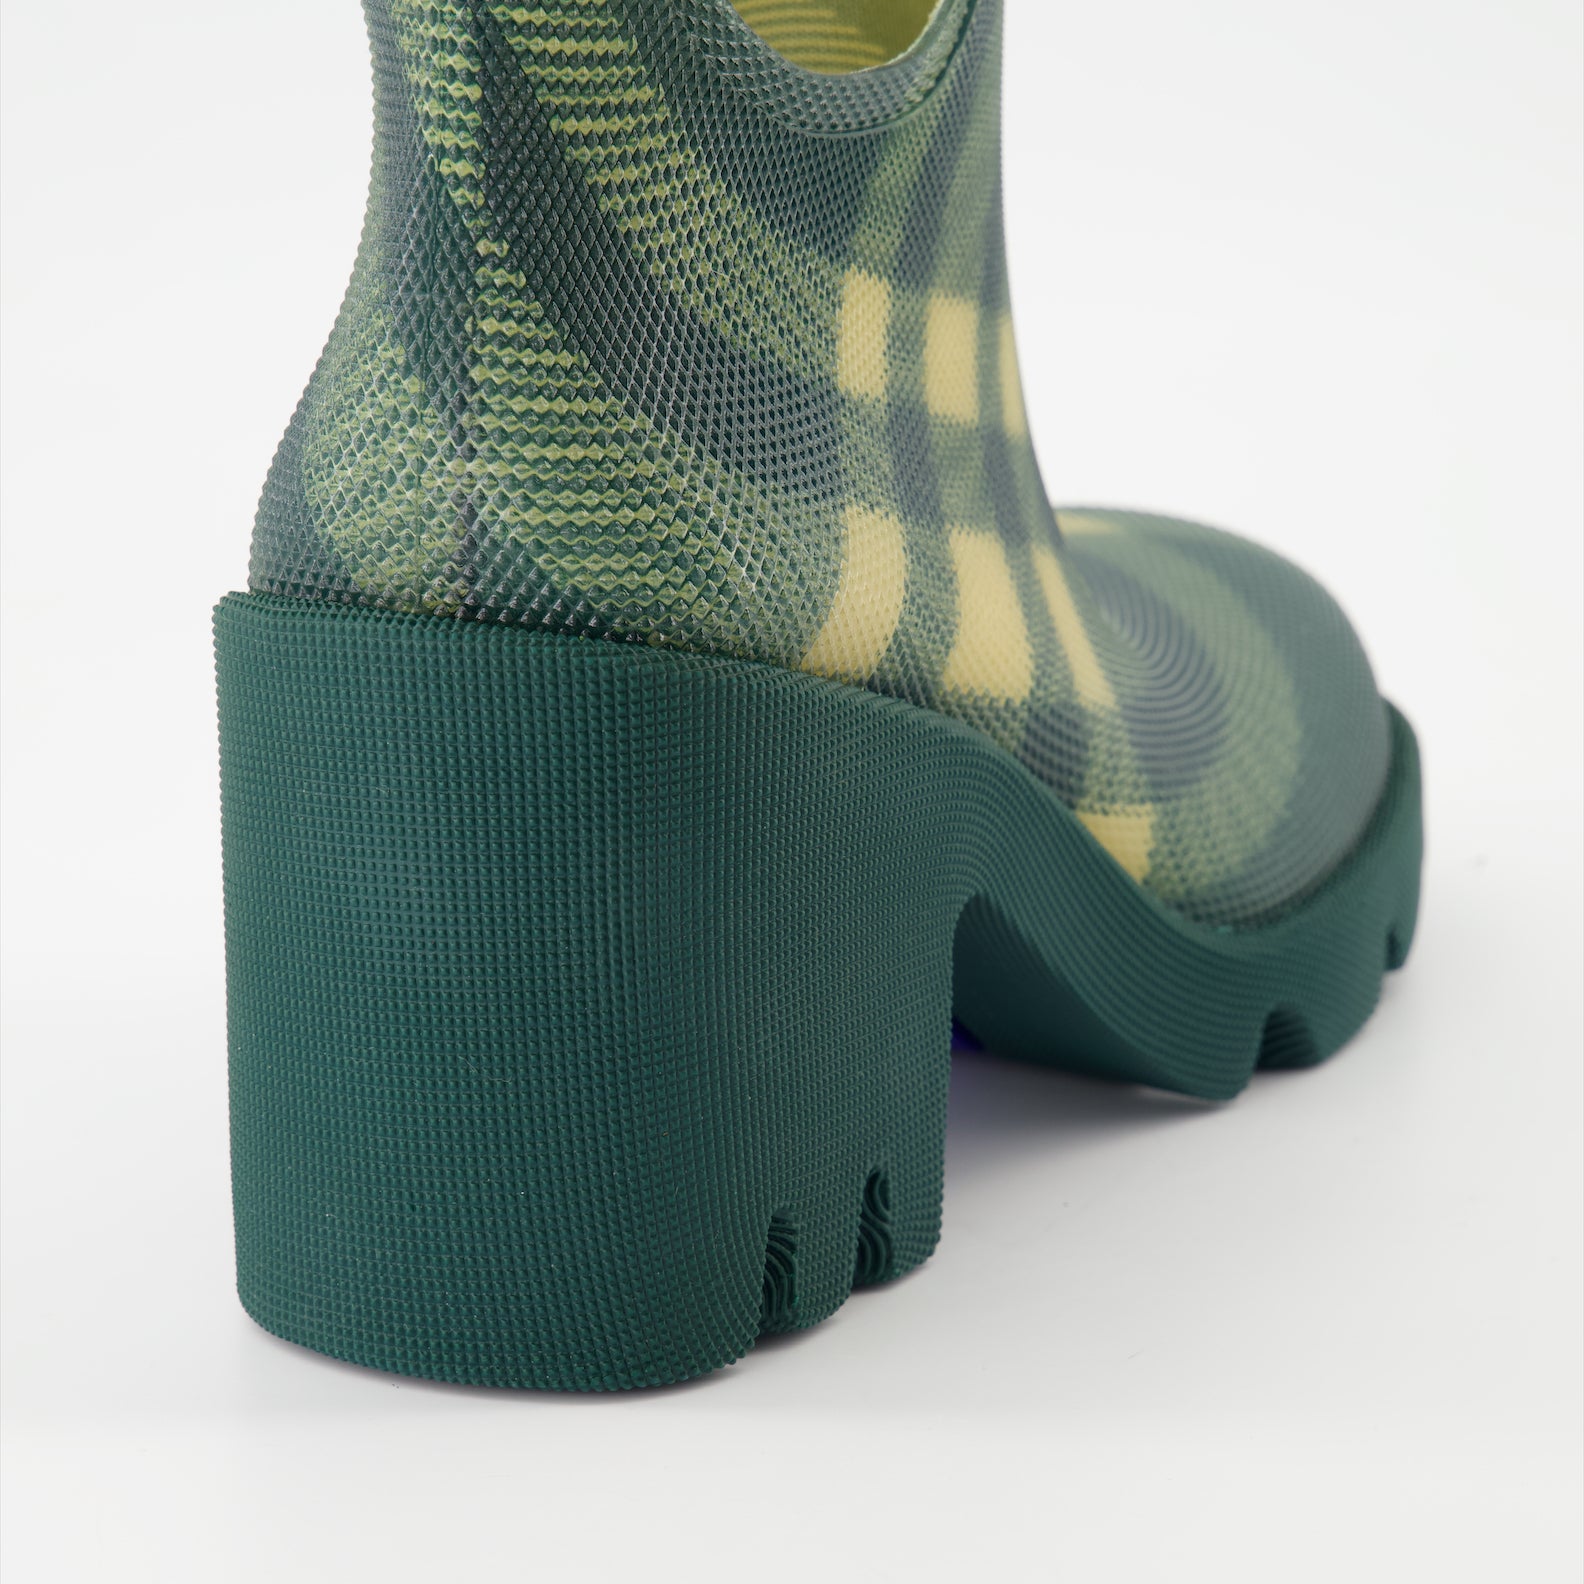 Marsh rubber ankle boots